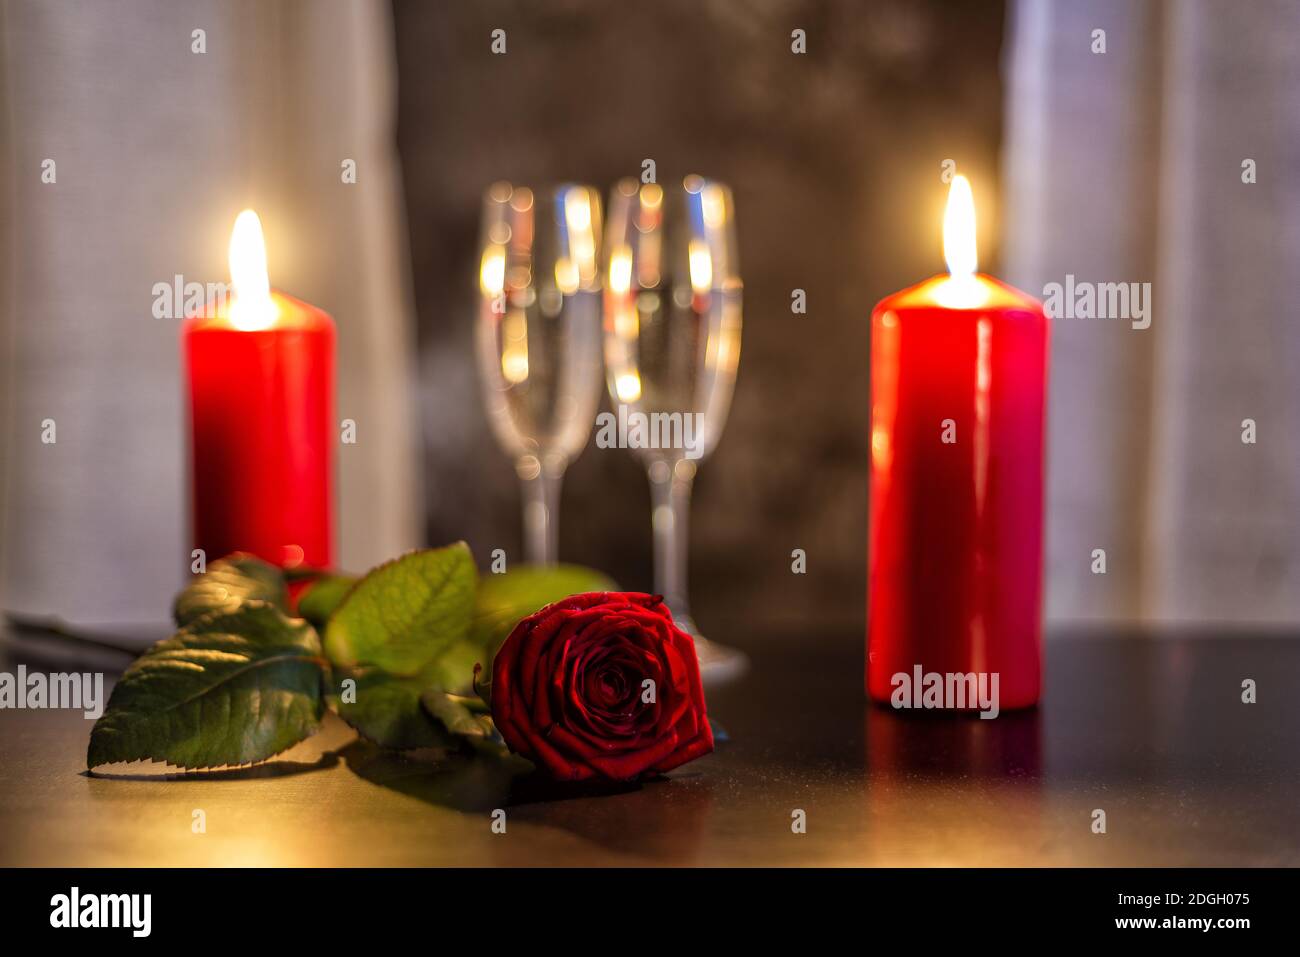 Red rose, champagne glasses and candles on Valentine's day Stock Photo